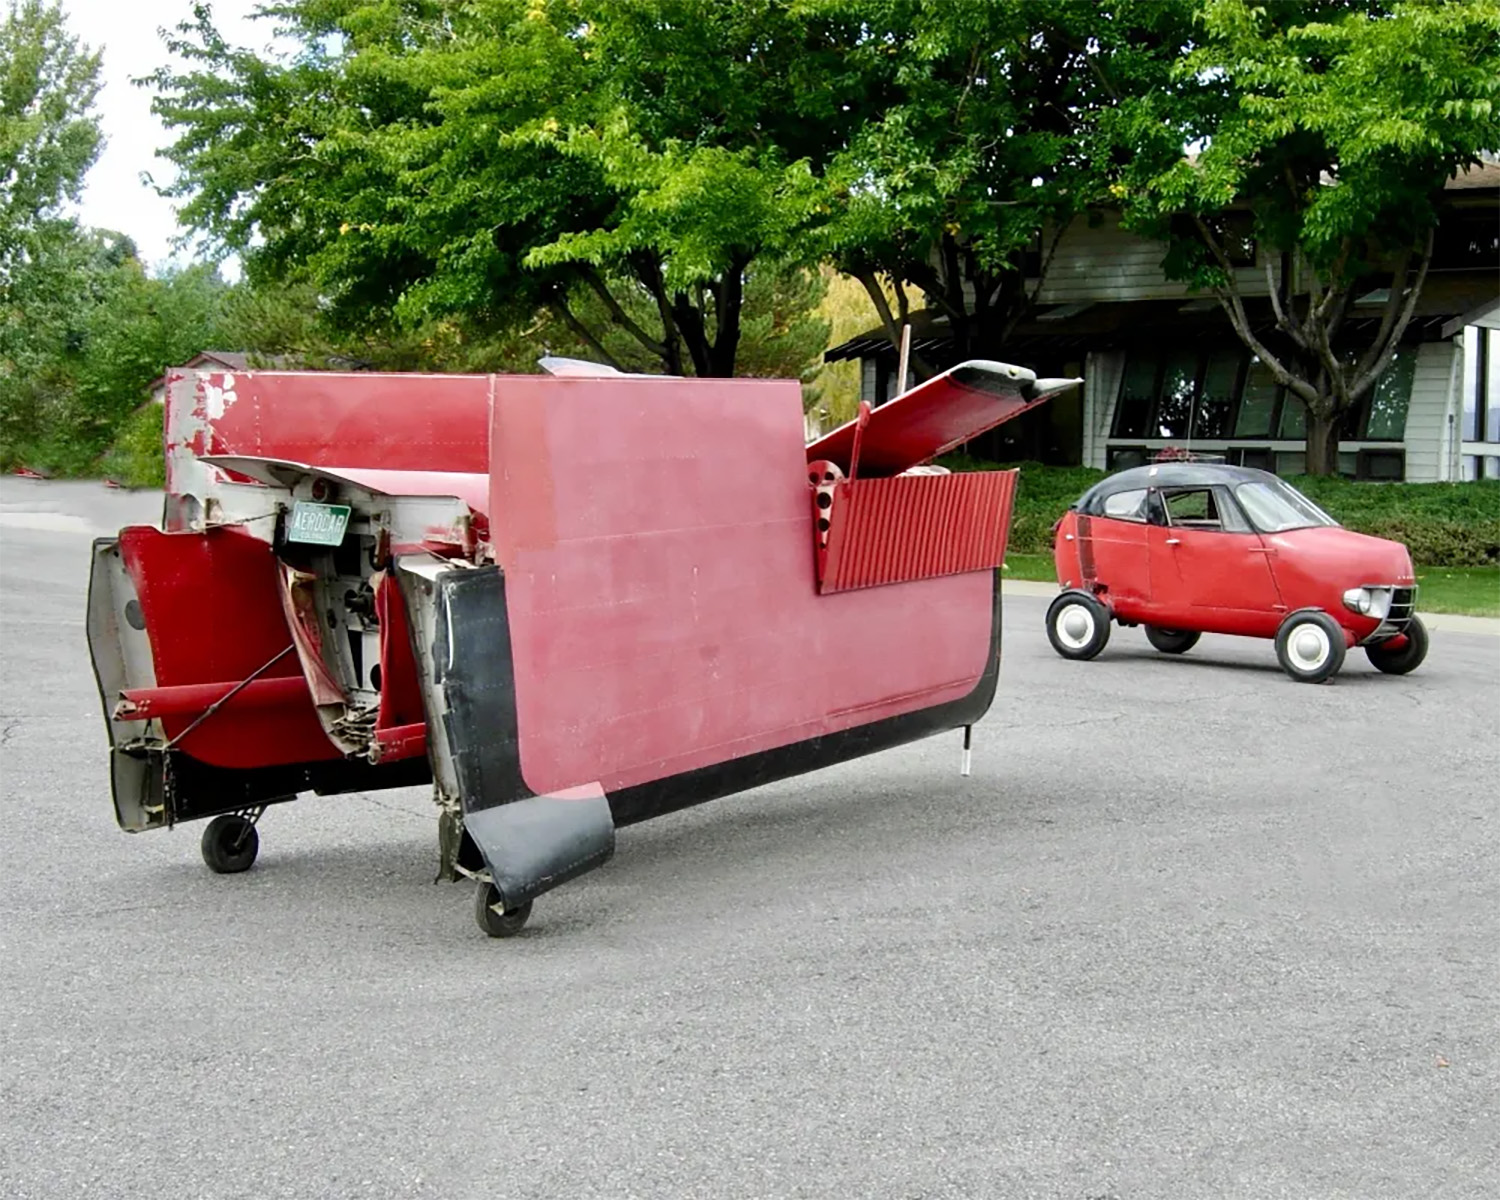 Red 1956 Taylor Aerocar flying car parked on street with its wing and fuselage trailer